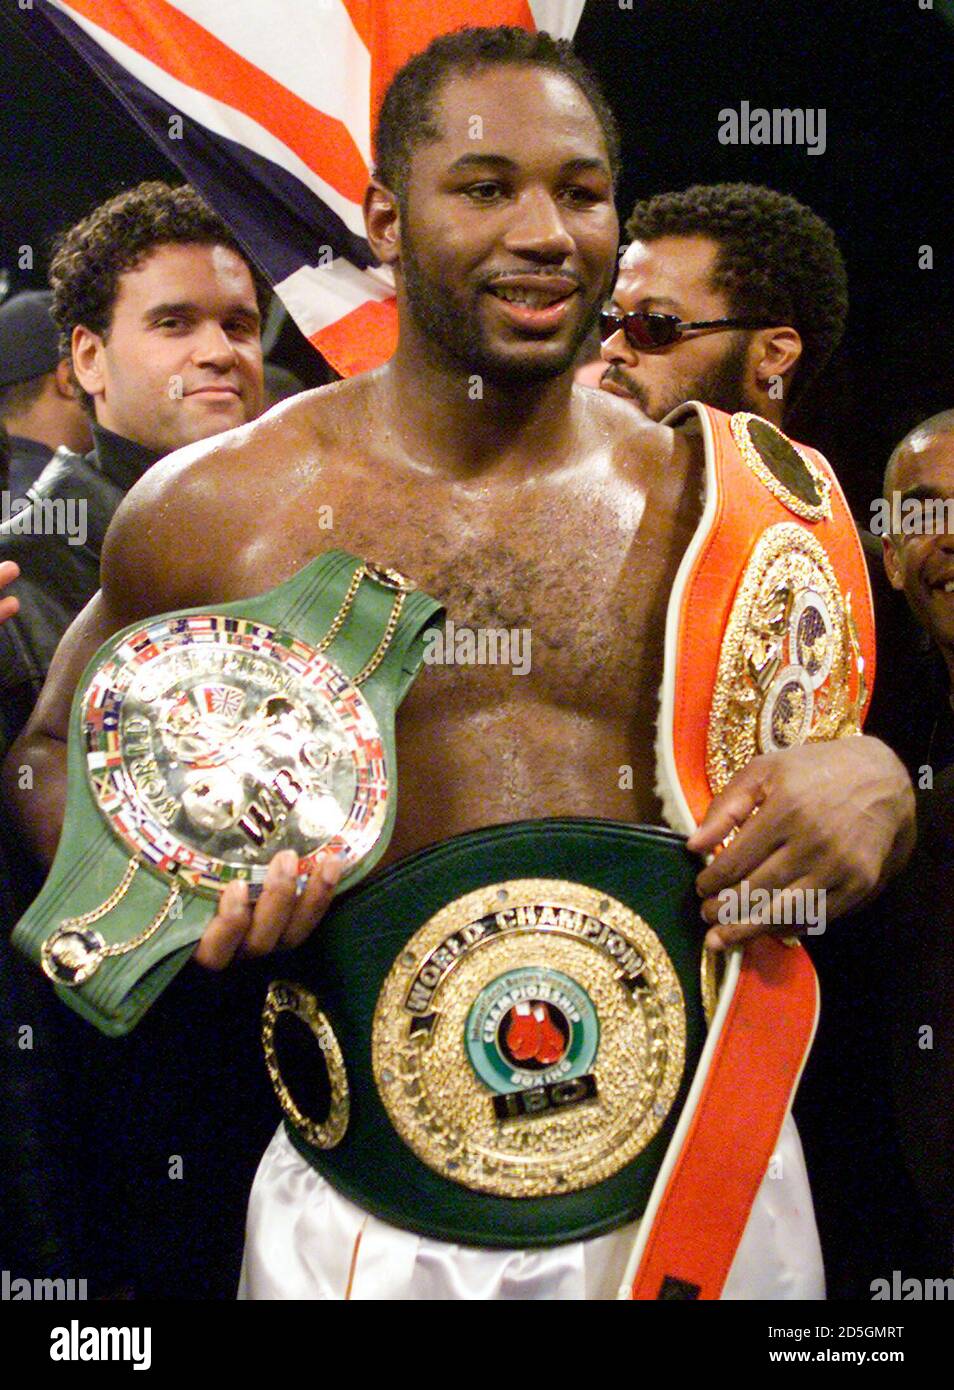 WBC and IBF heavyweight champion Lennox Lewis of London, England, displays  his belts after knocking out challenger Michael Grant of Norristown,  Pennsylvania, in the second round of their fight at Madison Square